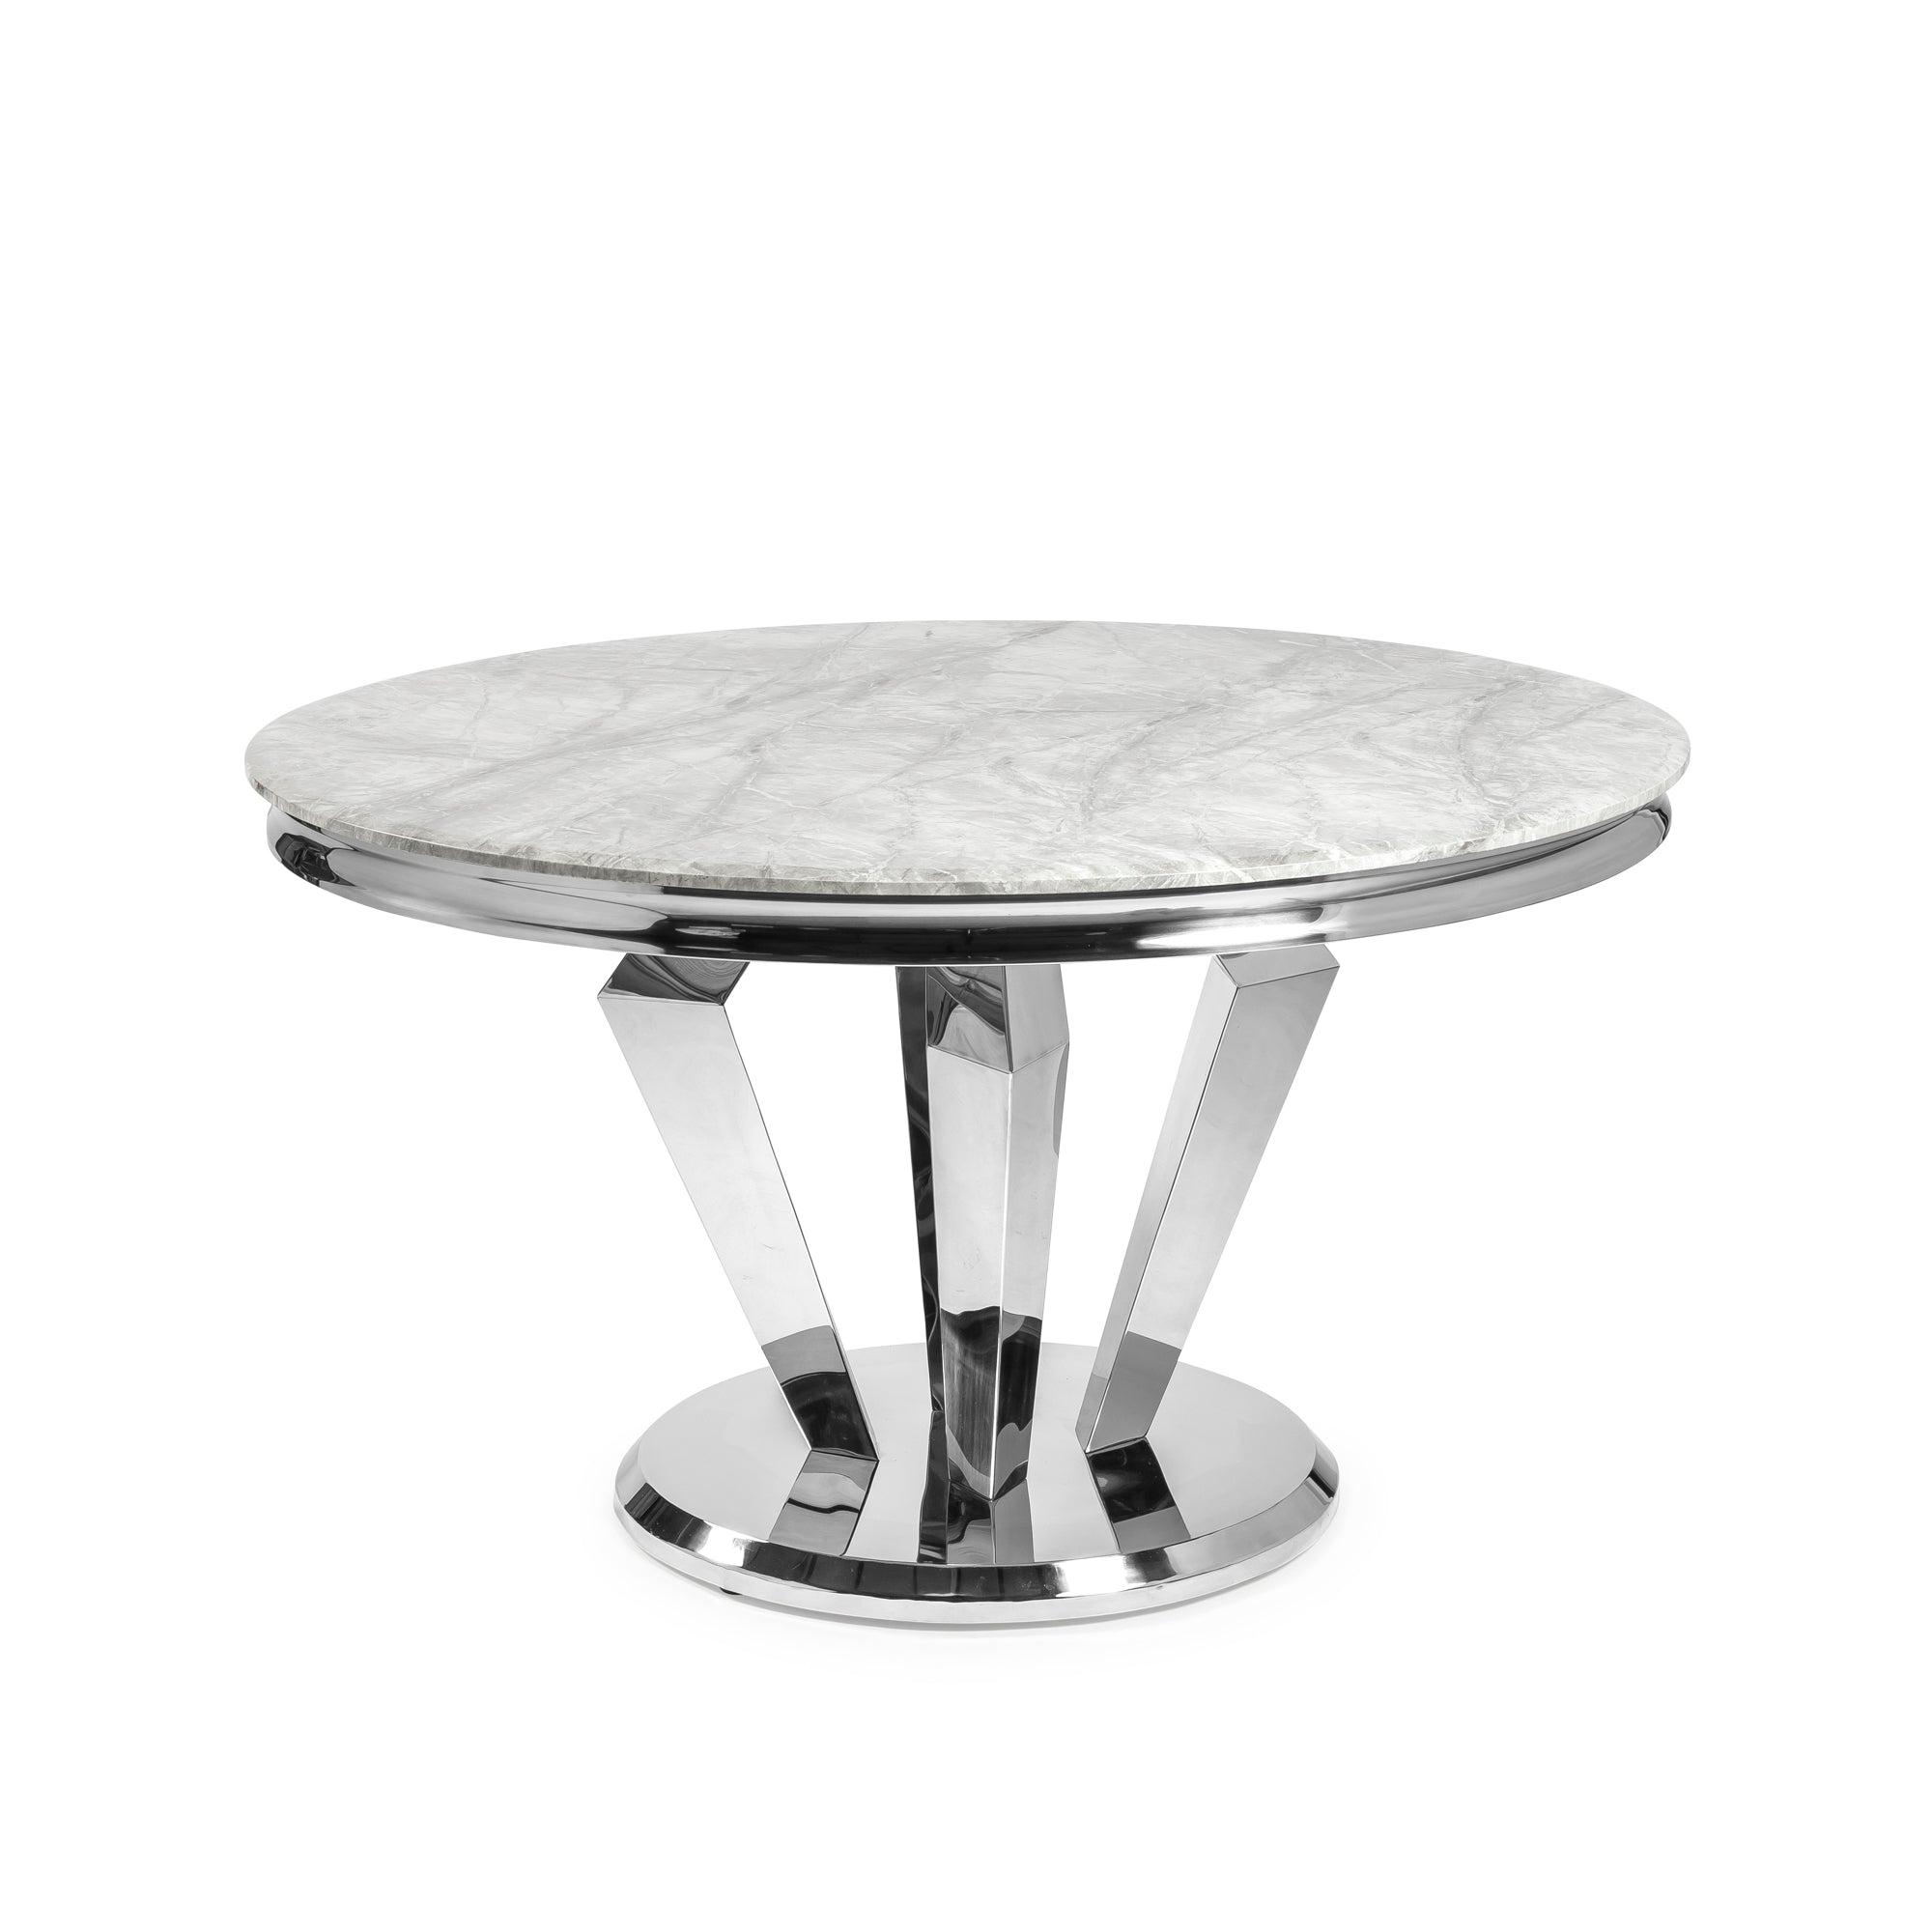 Athena Dining Table - ALL SIZES